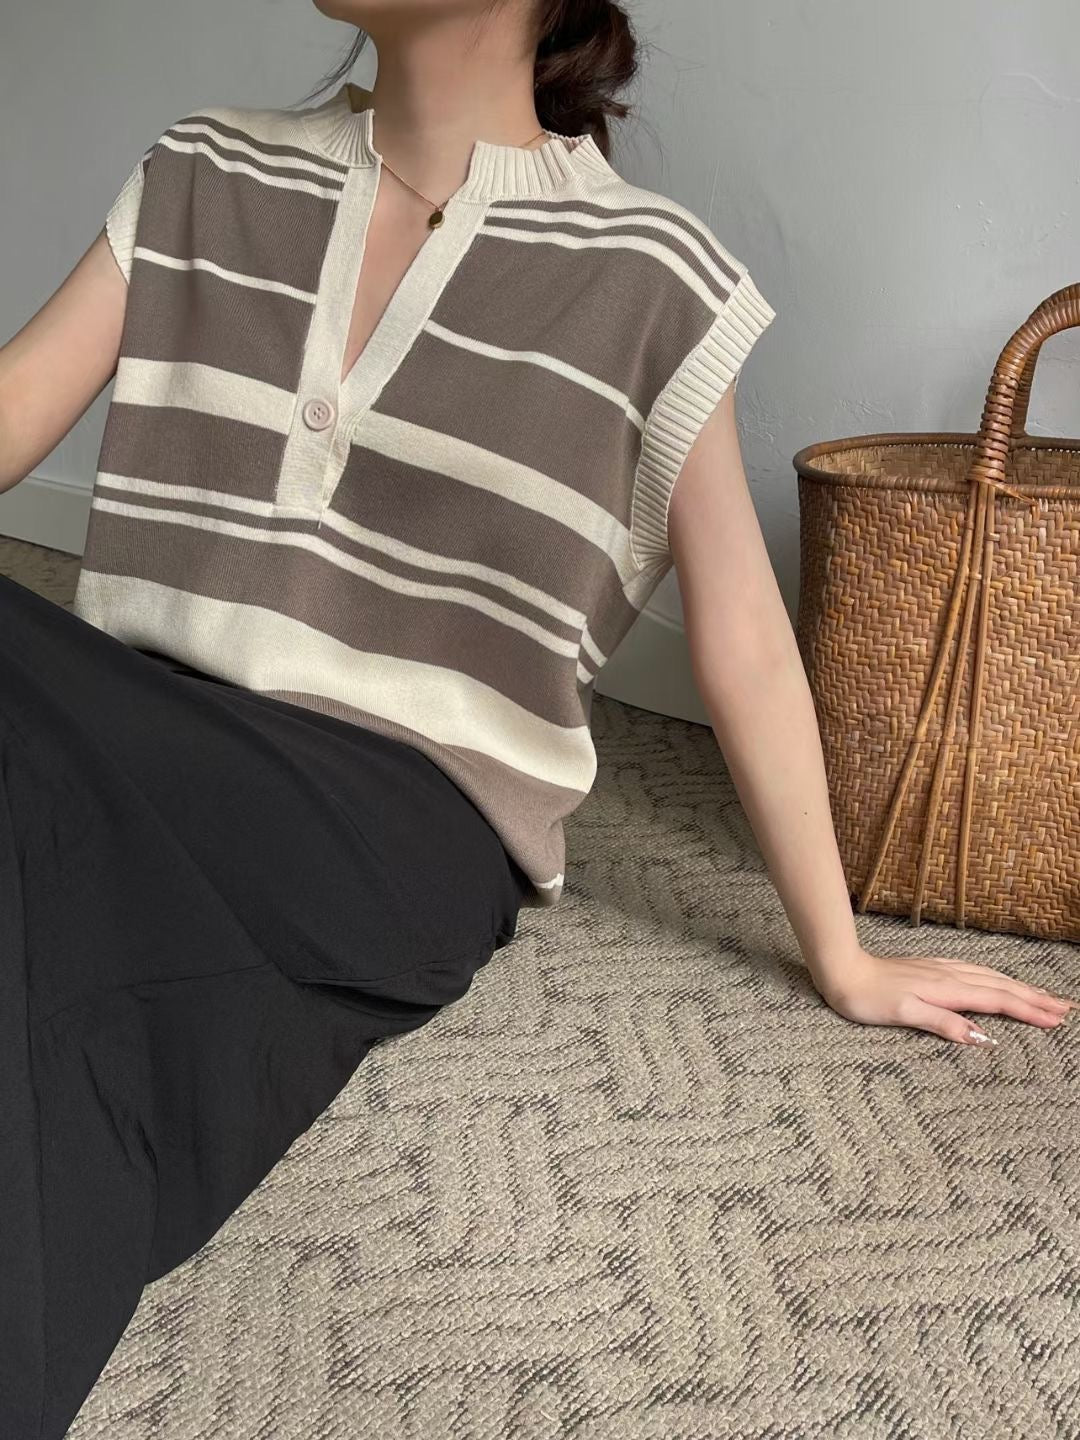 One Working Button Stripe Sleeveless Oversize Knitted Top